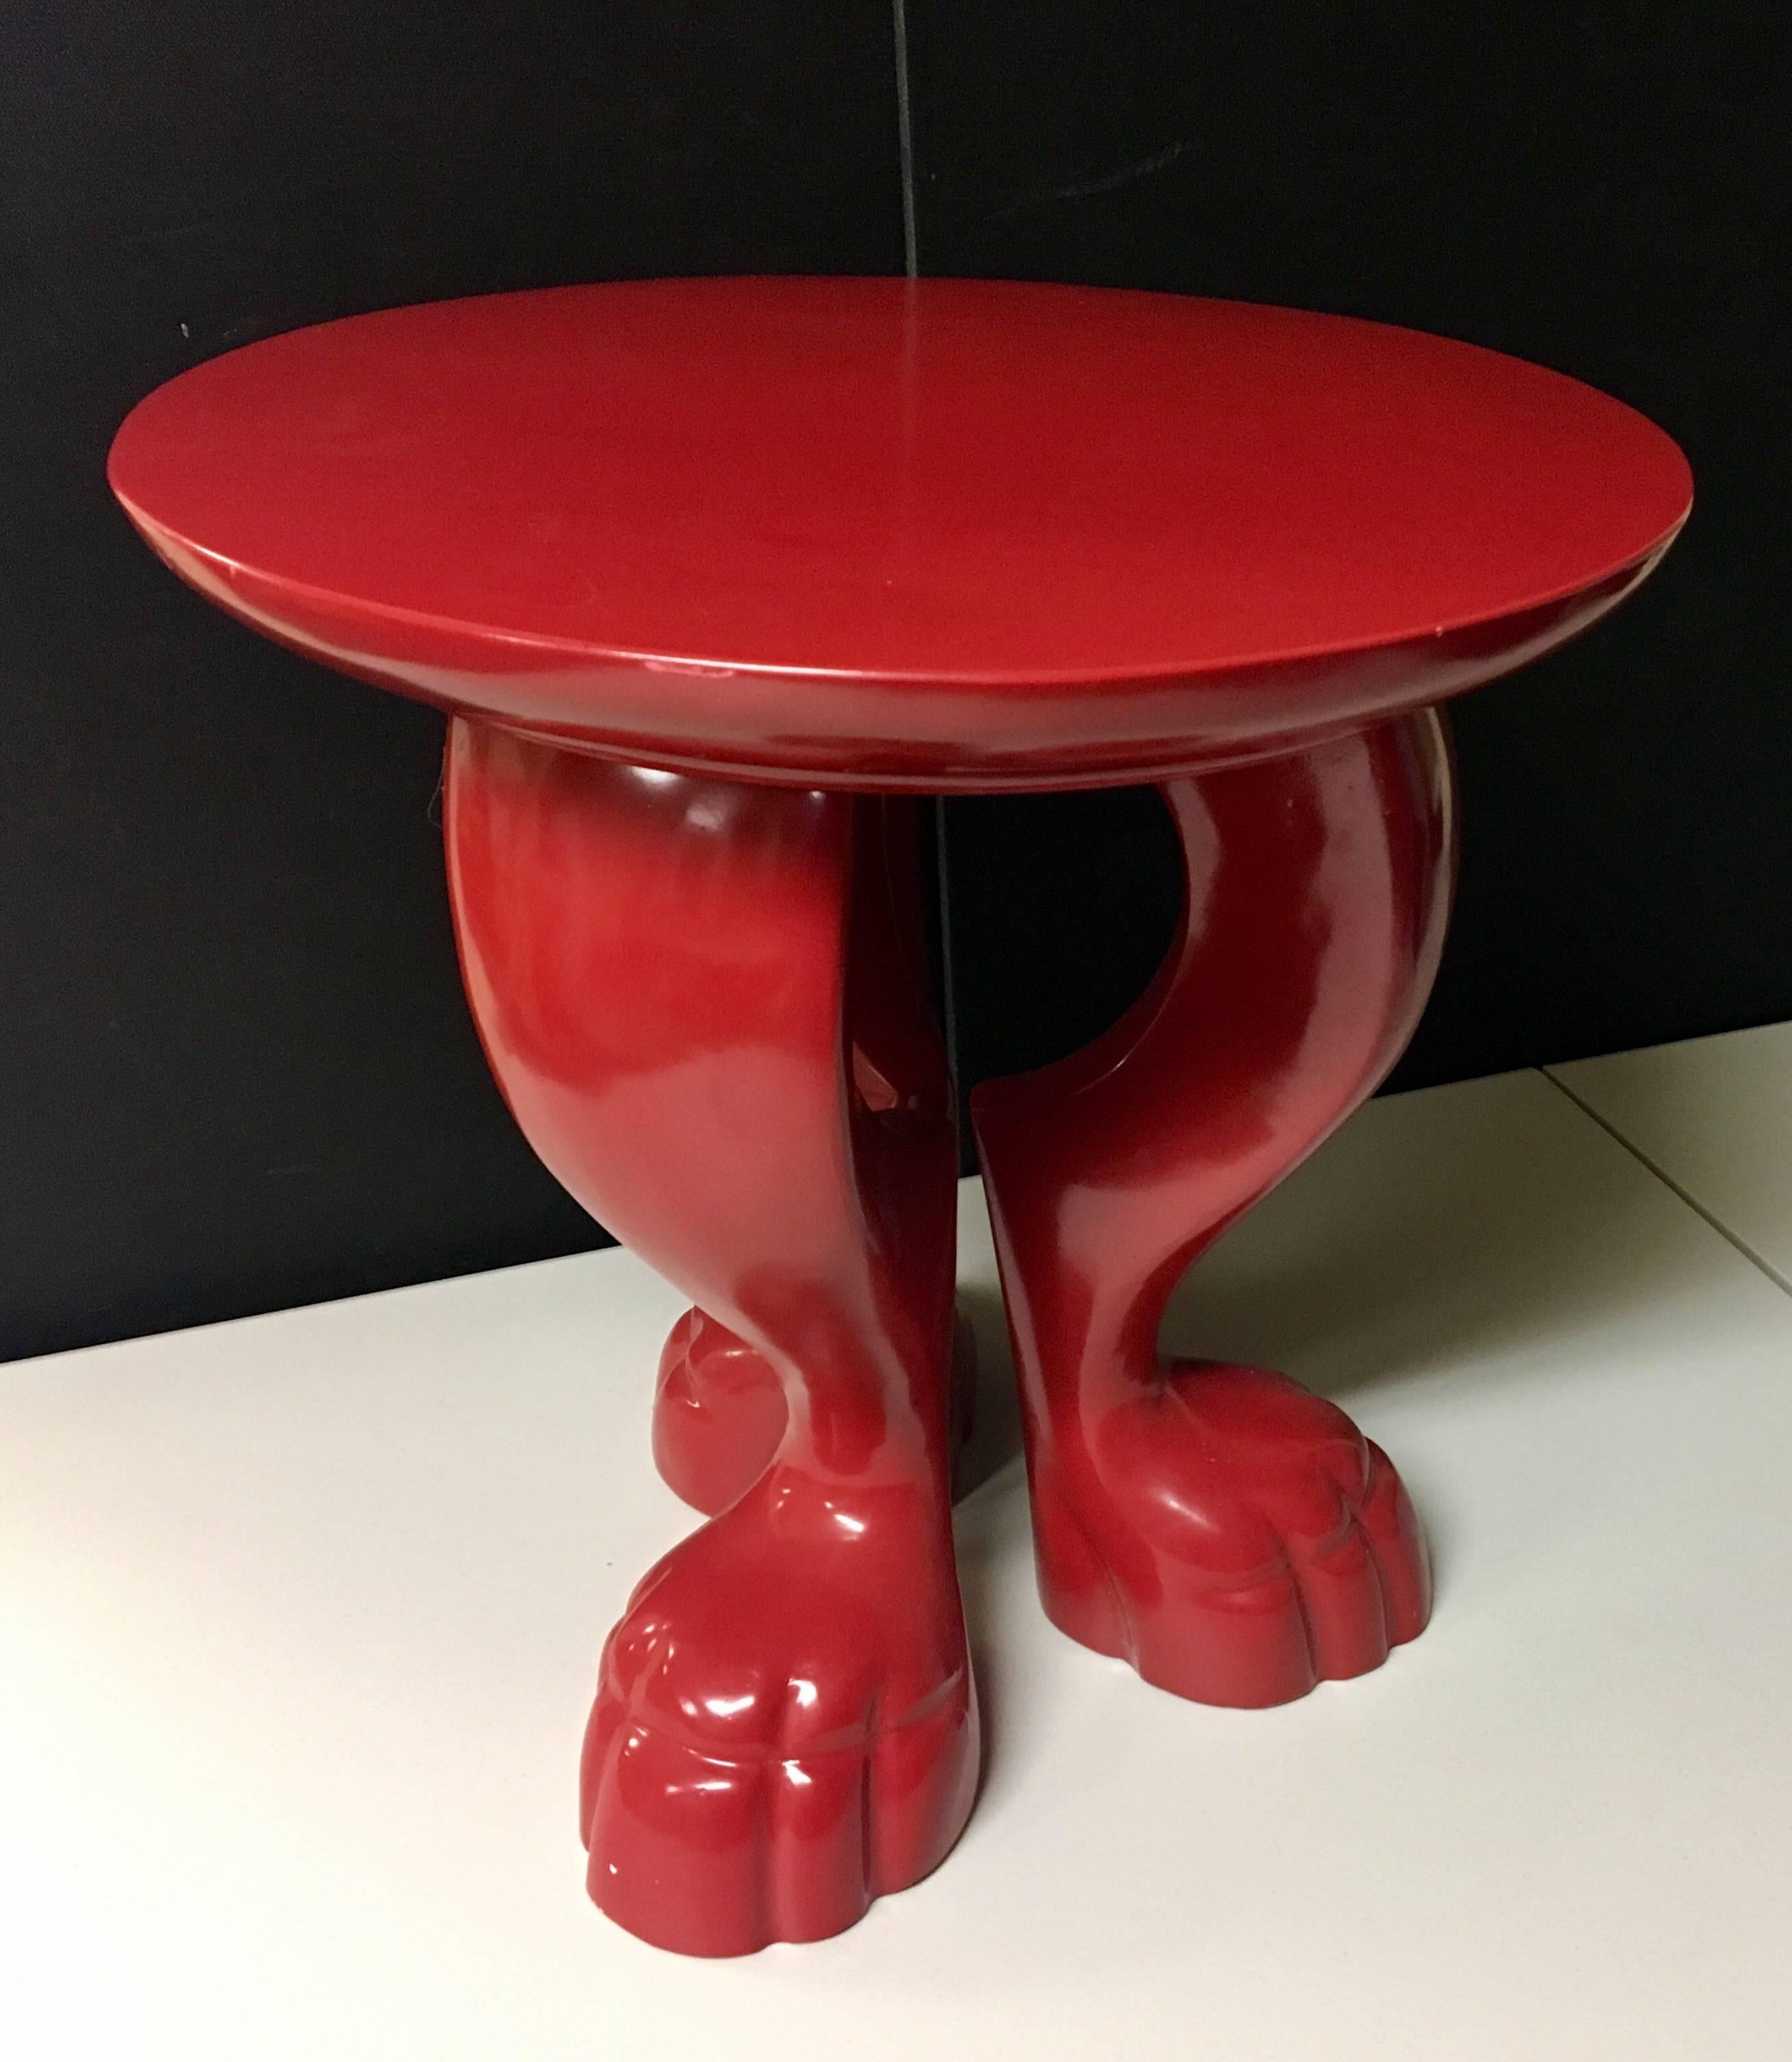 Eclectic tri-footed pedestal table designed by Jacques Garcia for Baker. The table is very heavy and is finished in red lacquer. It would make a great conversation piece in any room!